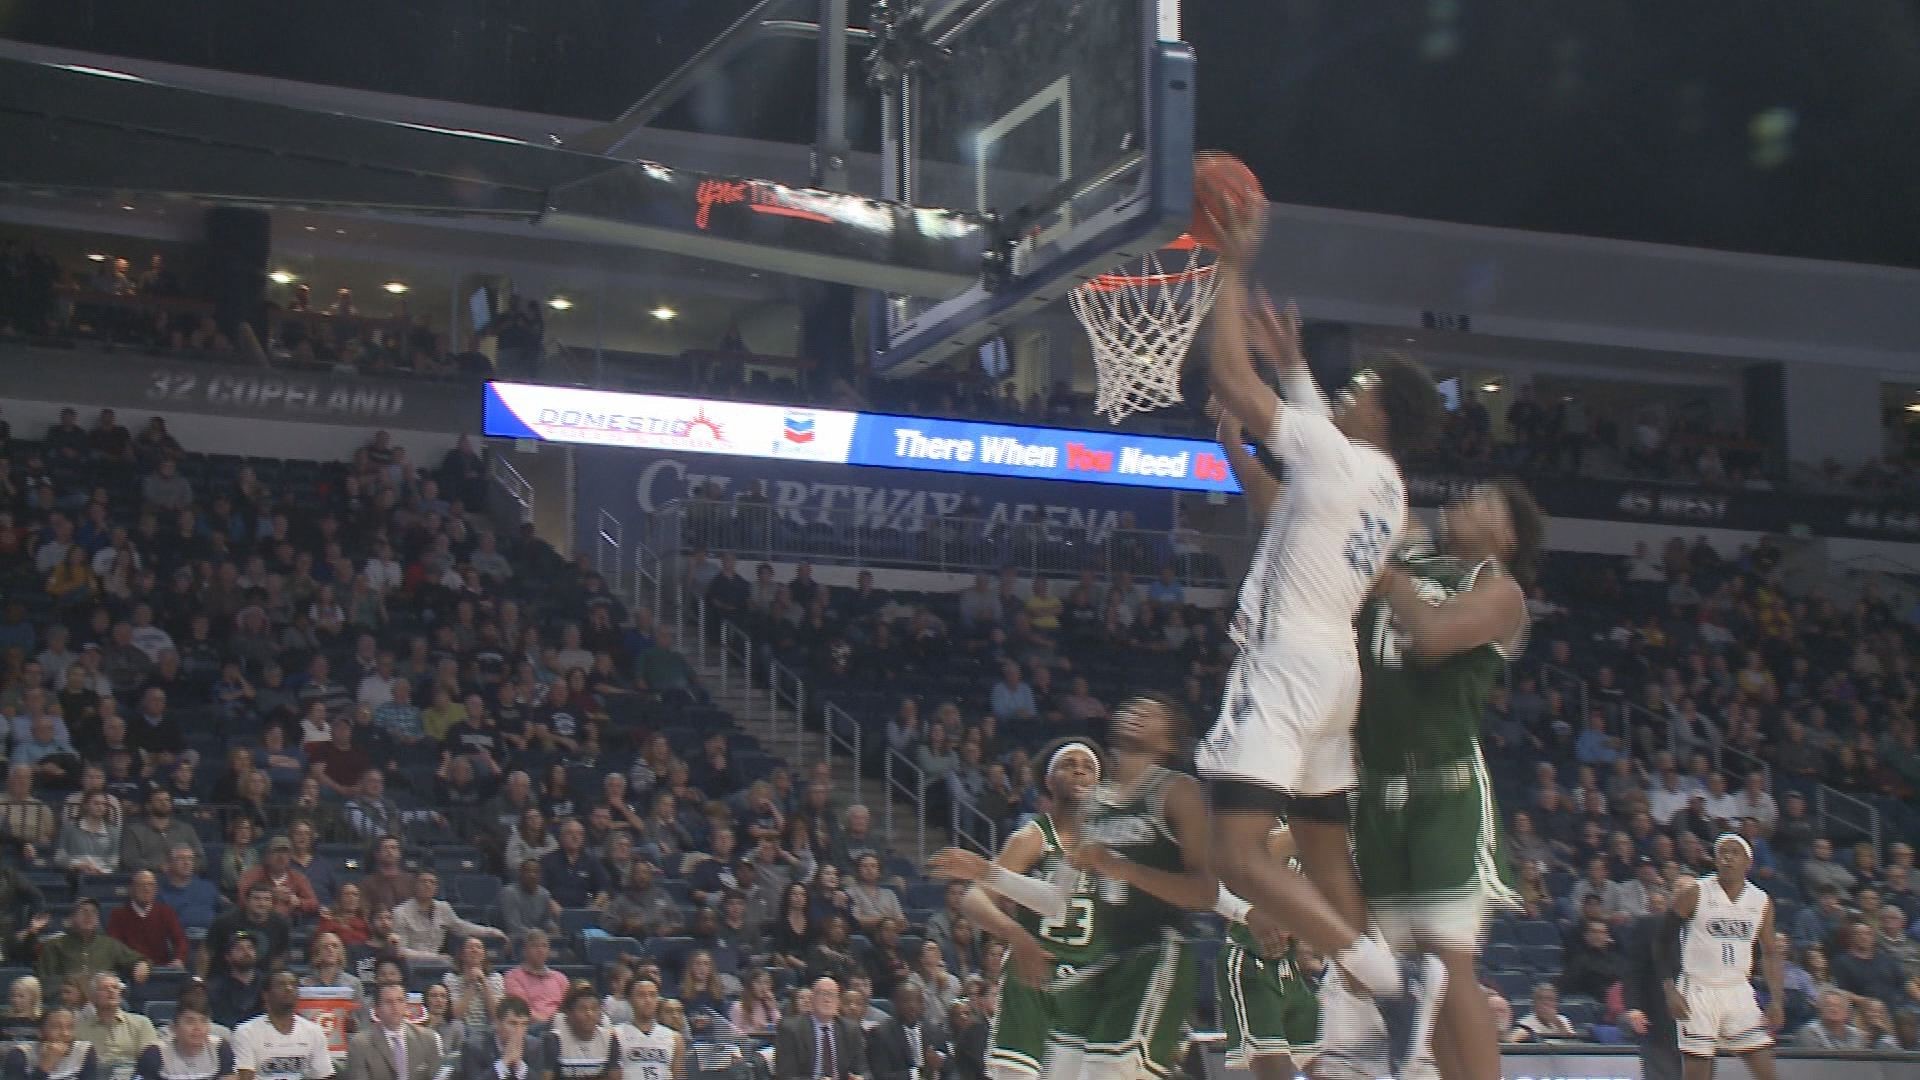 ODU won its third straight game as Kalu Ezikpe led the Monarchs with 12 points and 14 rebounds.